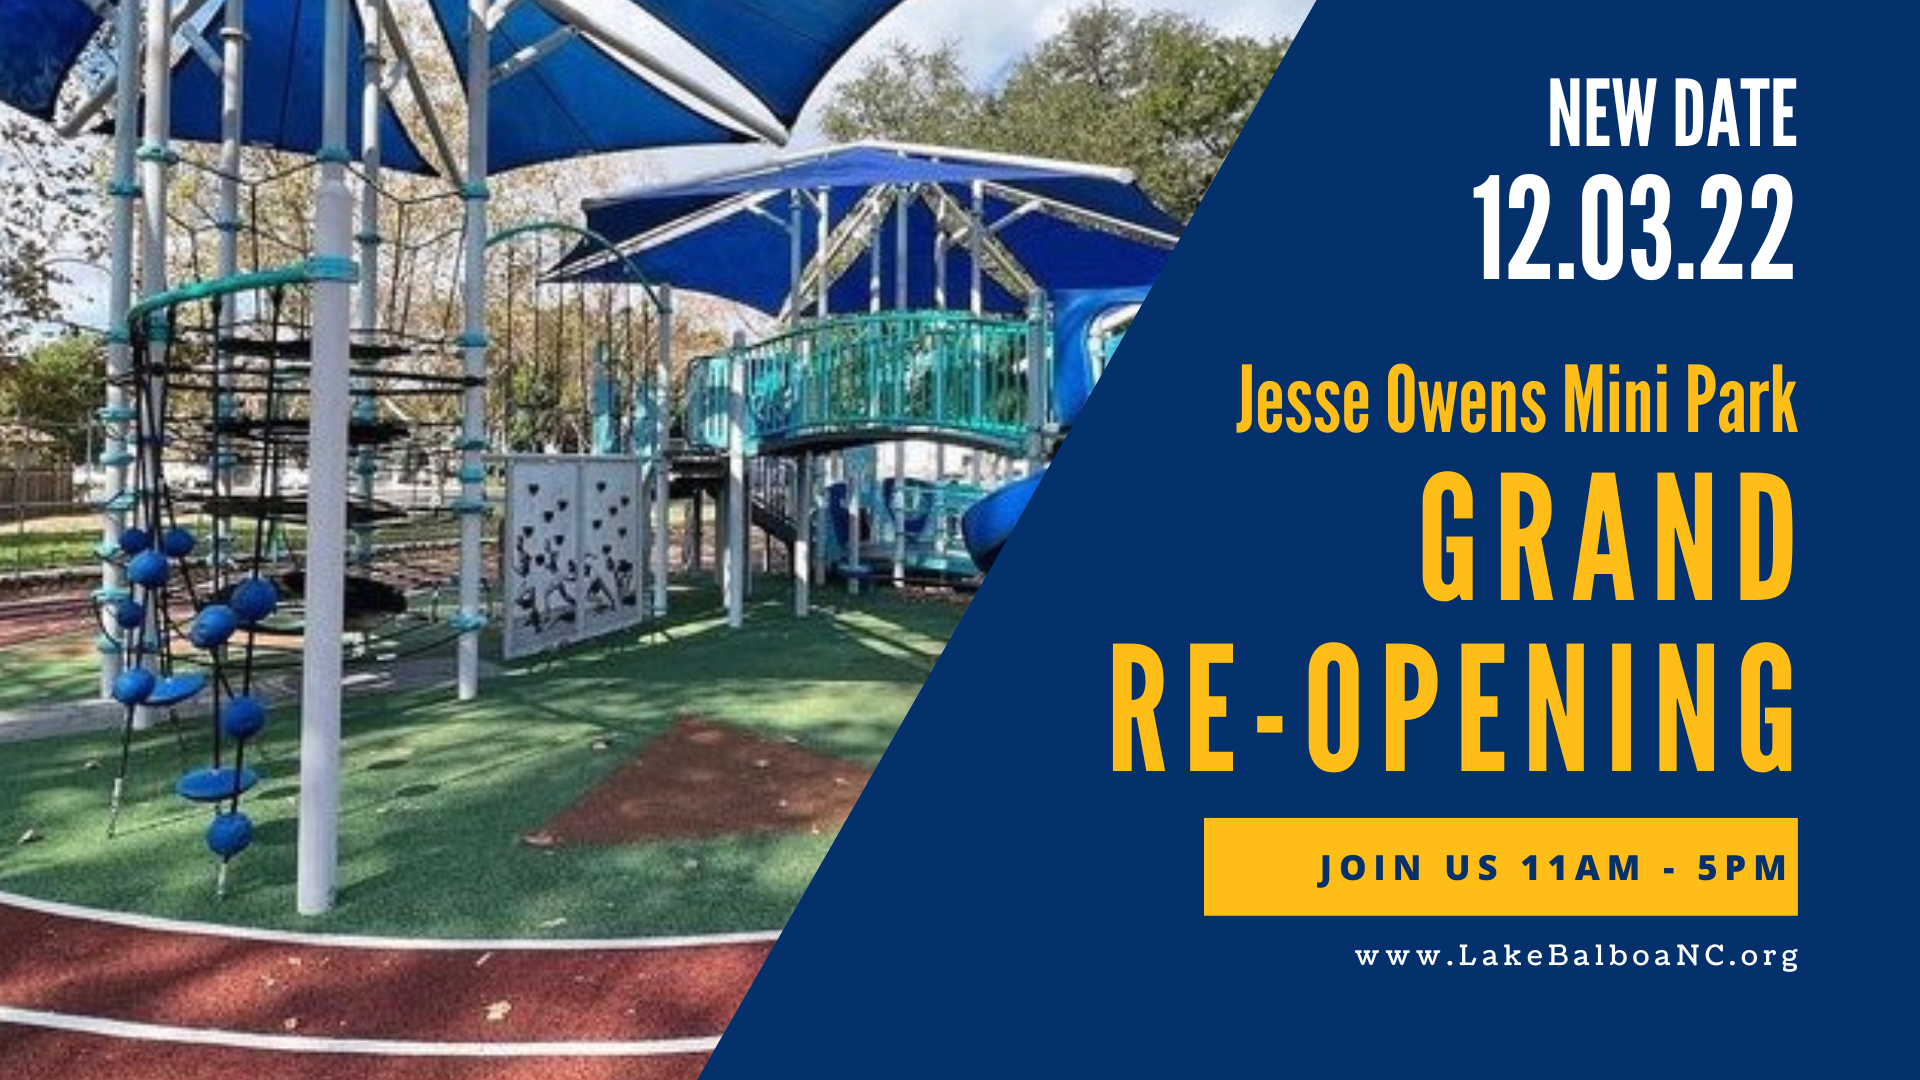 Jesse Owens Park Grand Re-Opening Facebook Event Cover Updated 10-24-22